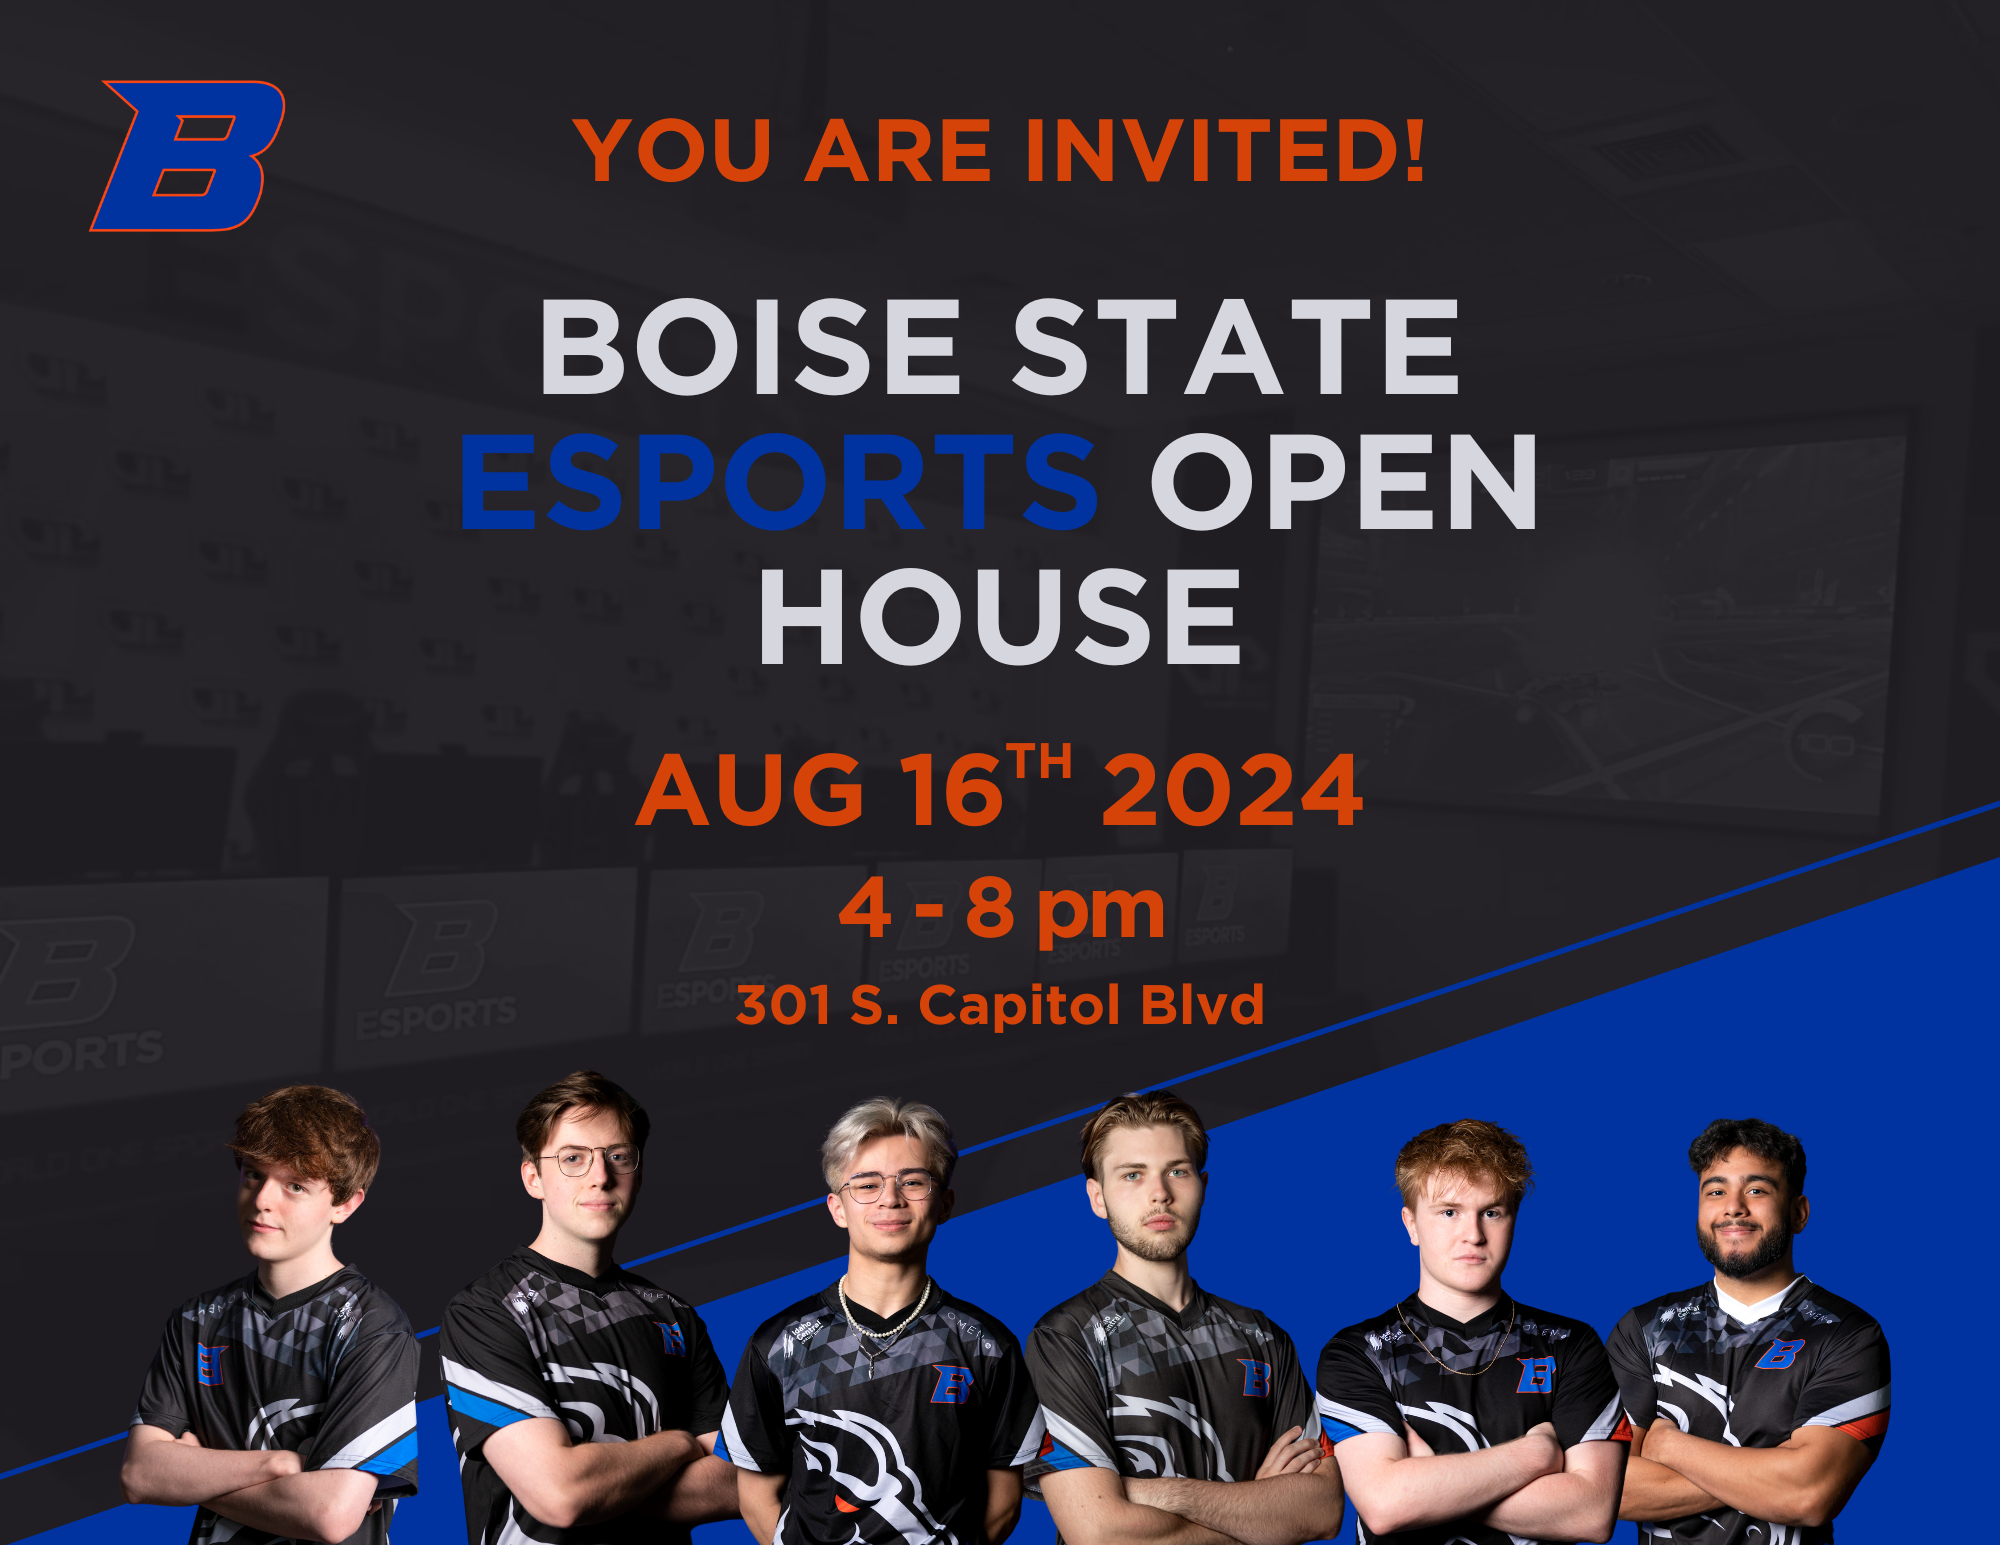 Boise State Esports open house graphic